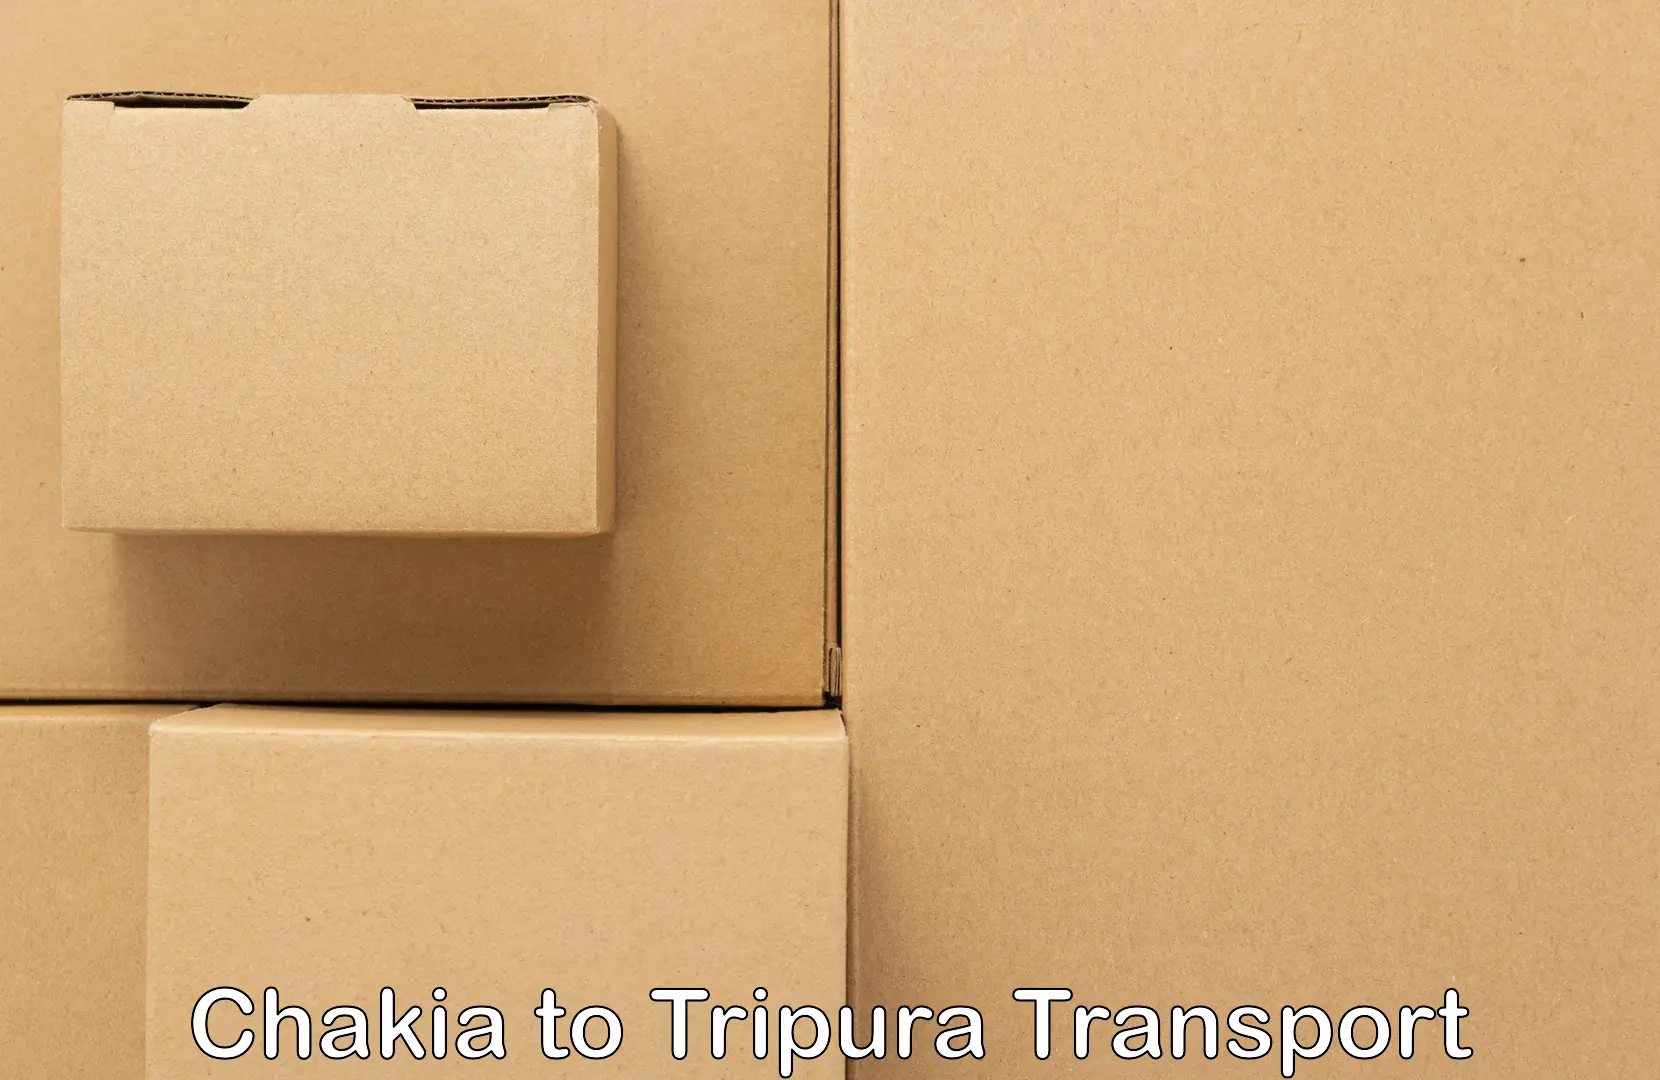 Air freight transport services in Chakia to Udaipur Tripura